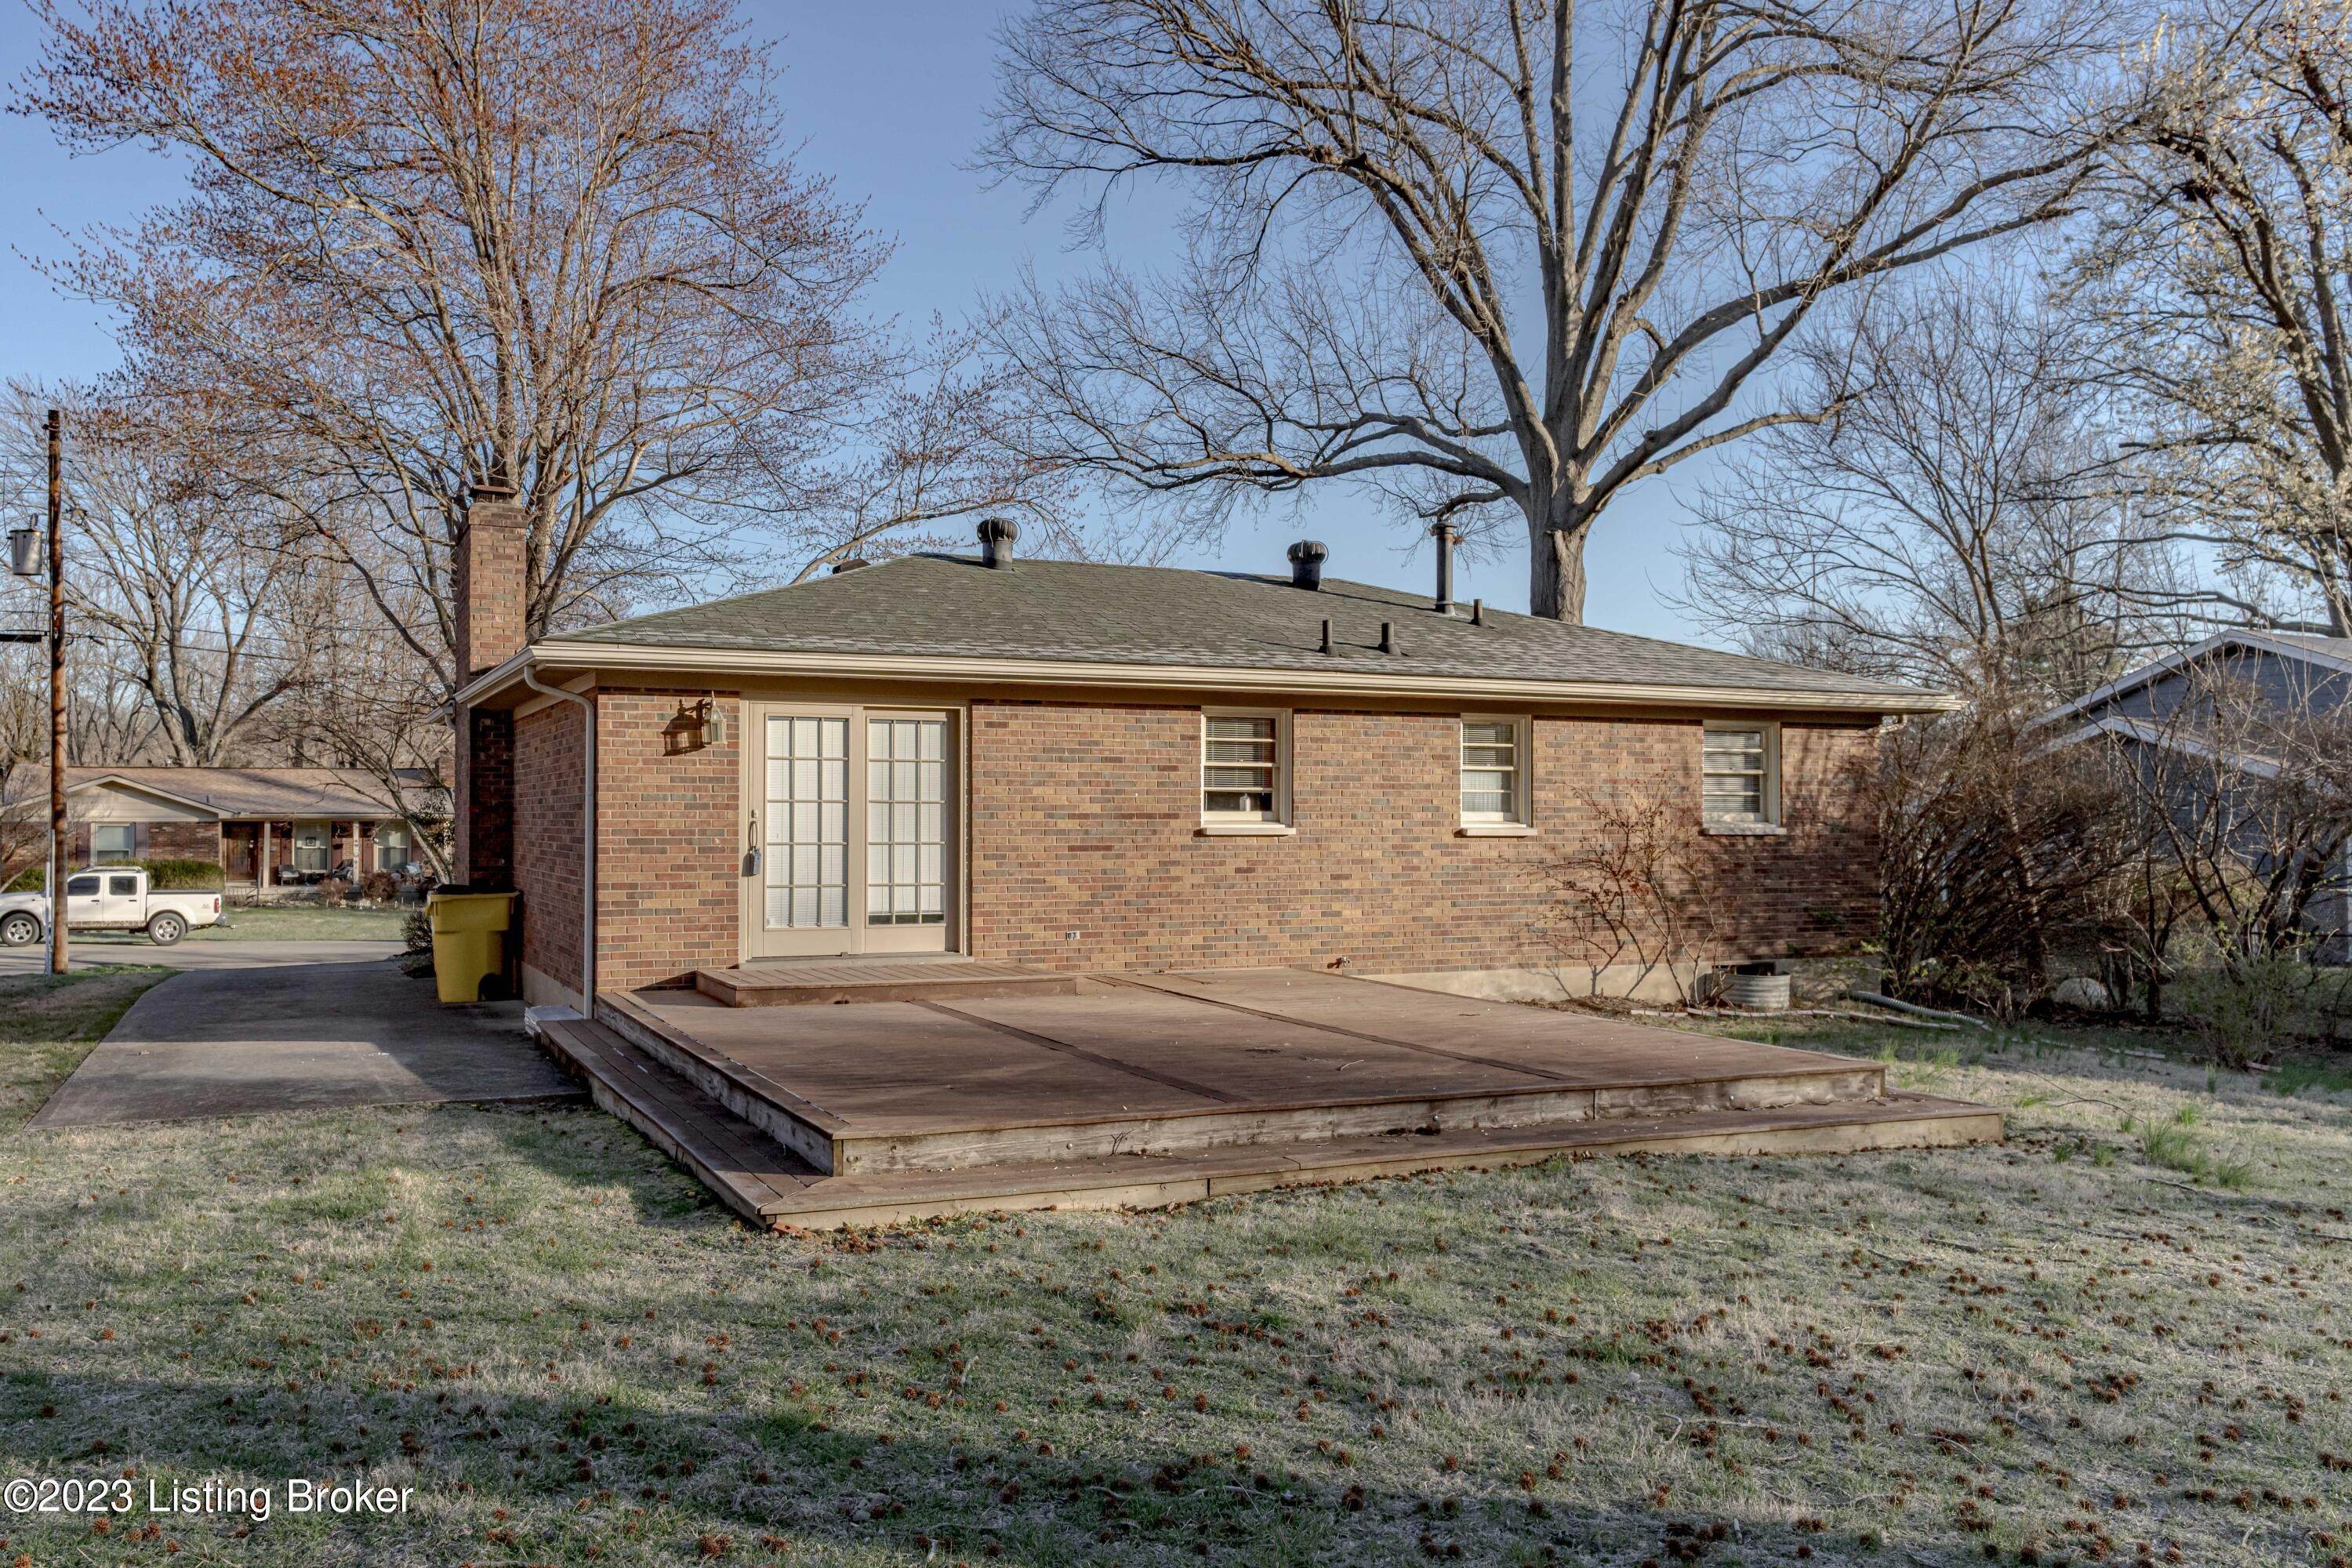 44. Single Family at Louisville, KY 40214